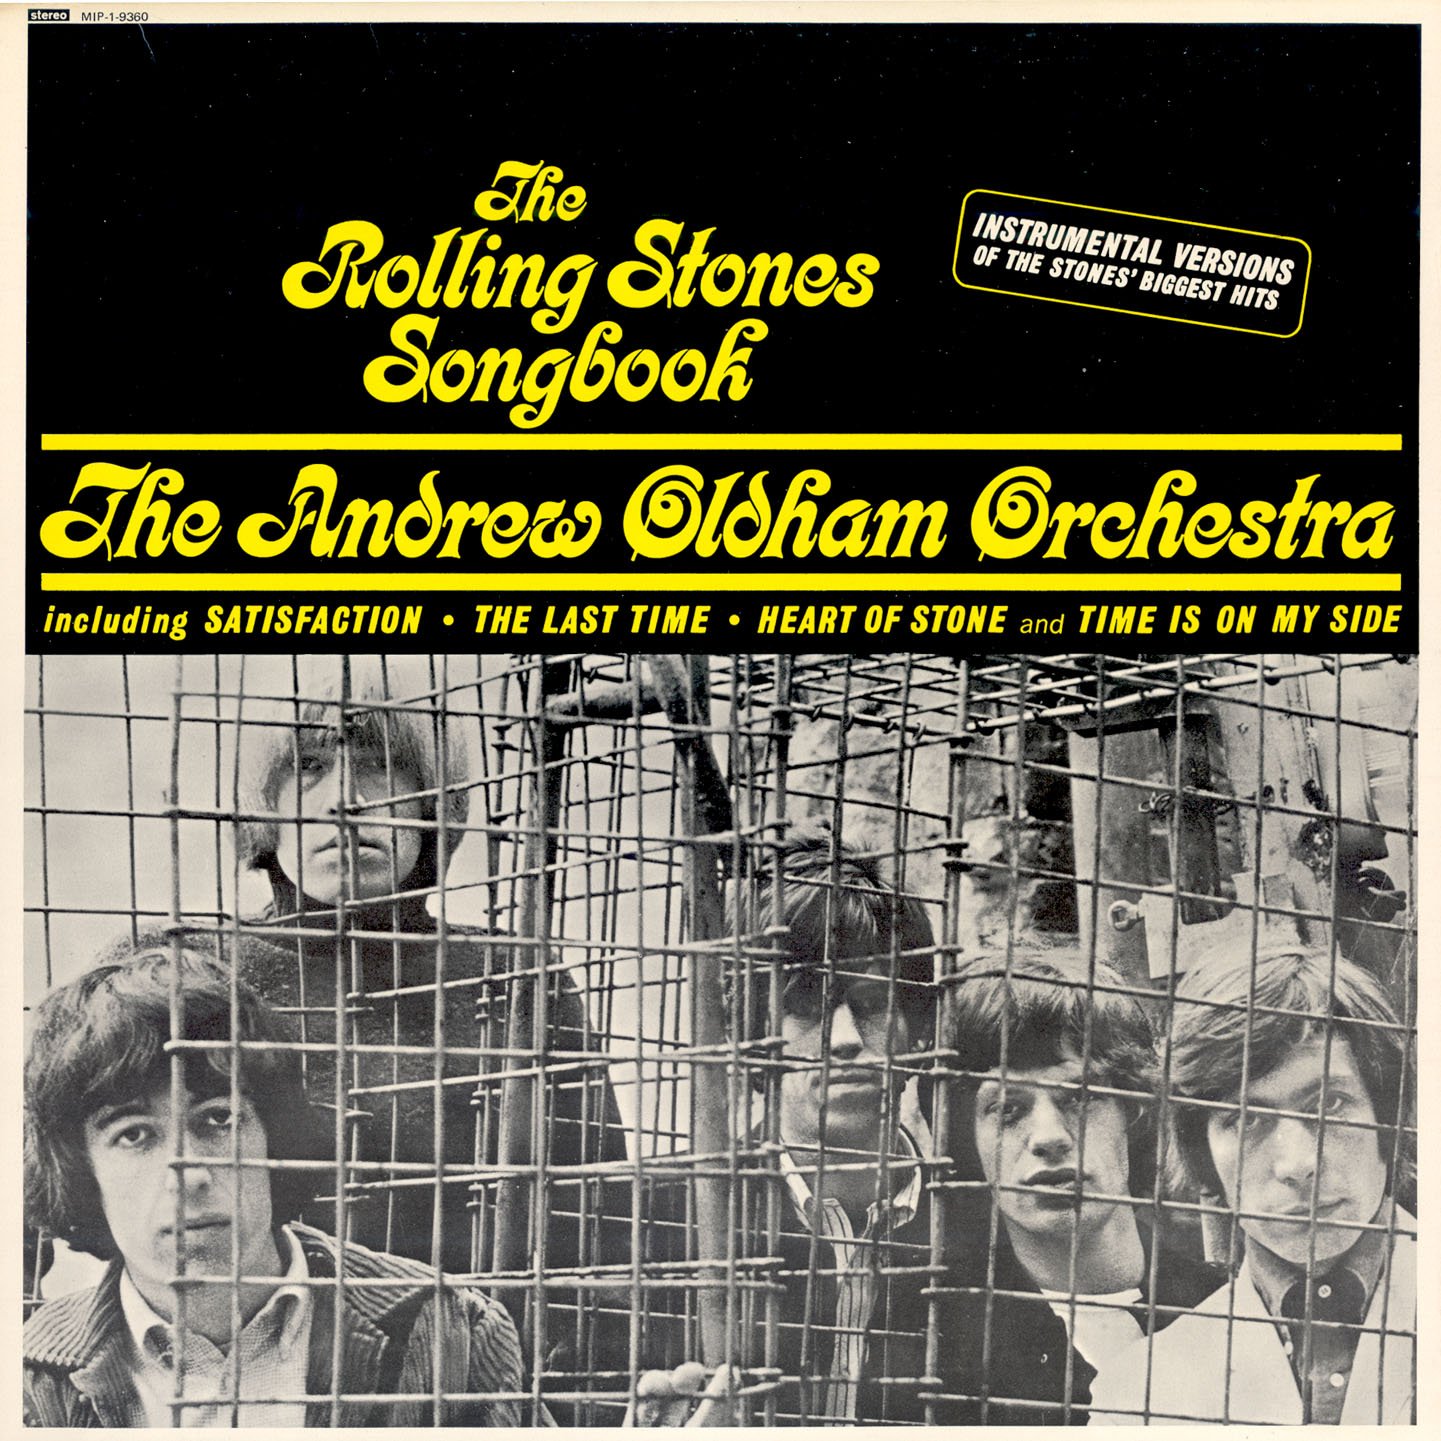 The Rolling Stones songbook — The Andrew Oldham Orchestra | Last.fm